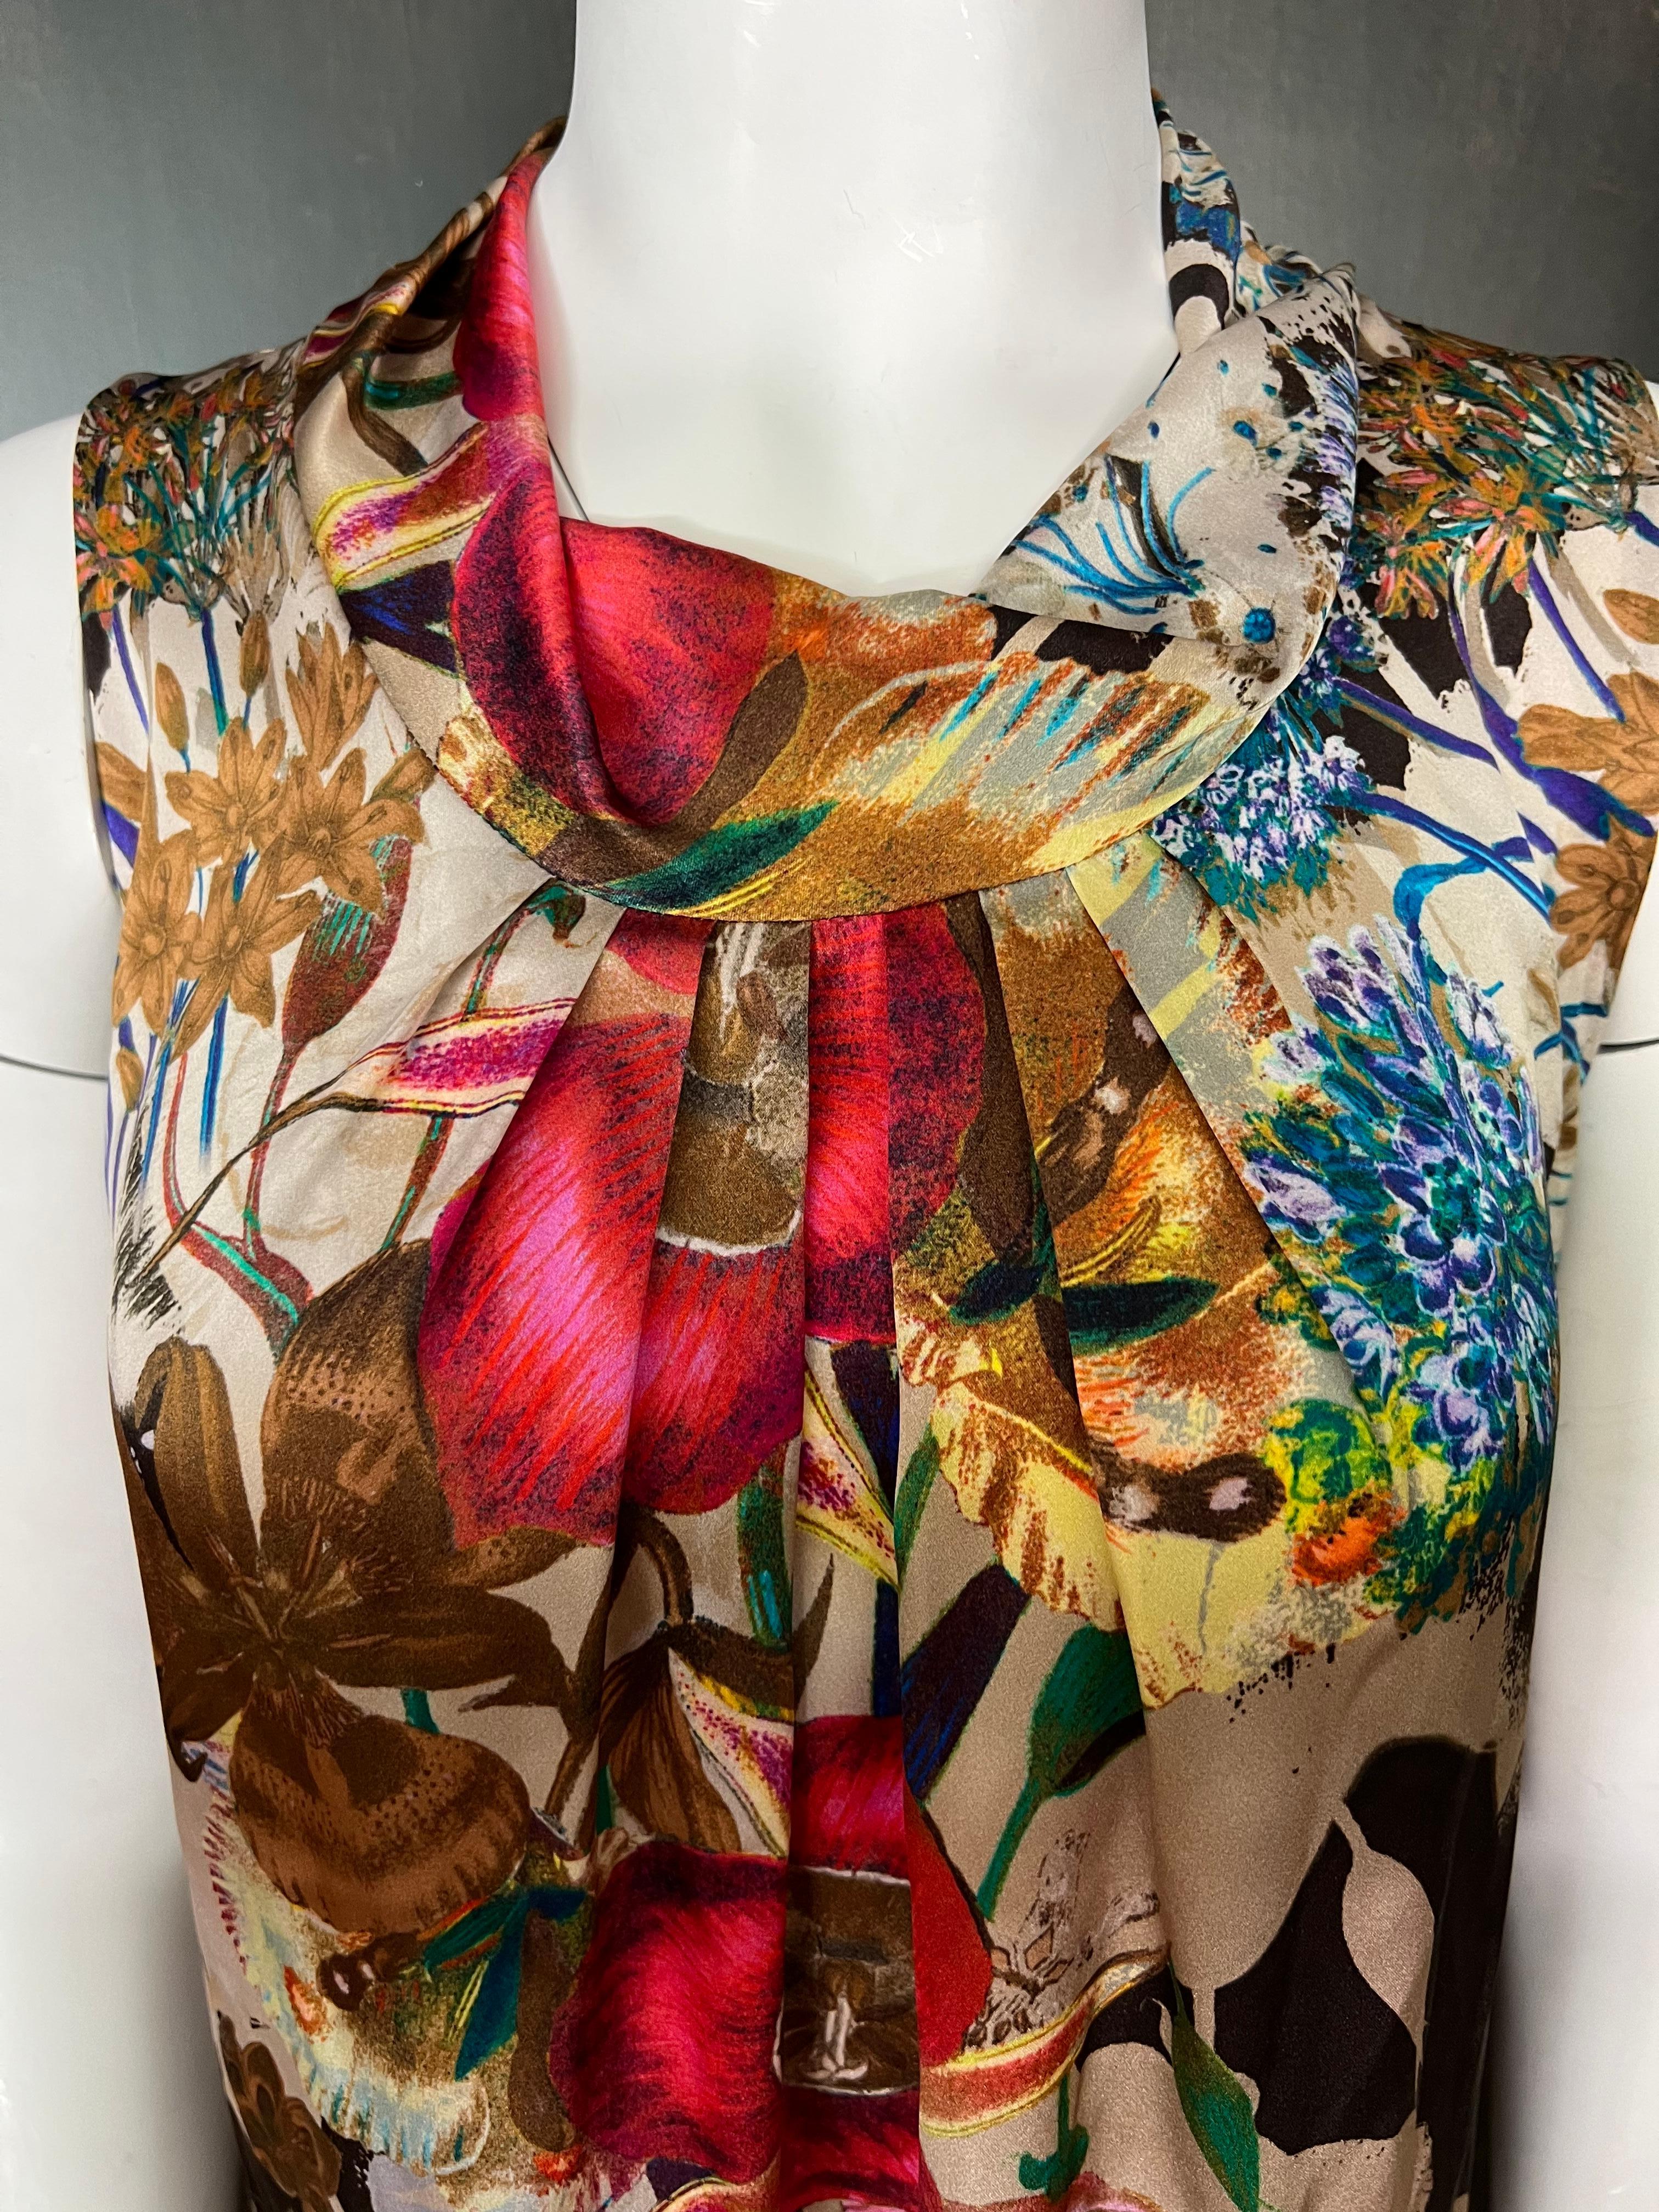 - Floral motif
- Collar design
- Sleeveless
- Made in Italy
- Exclusively for Newman Marcus 